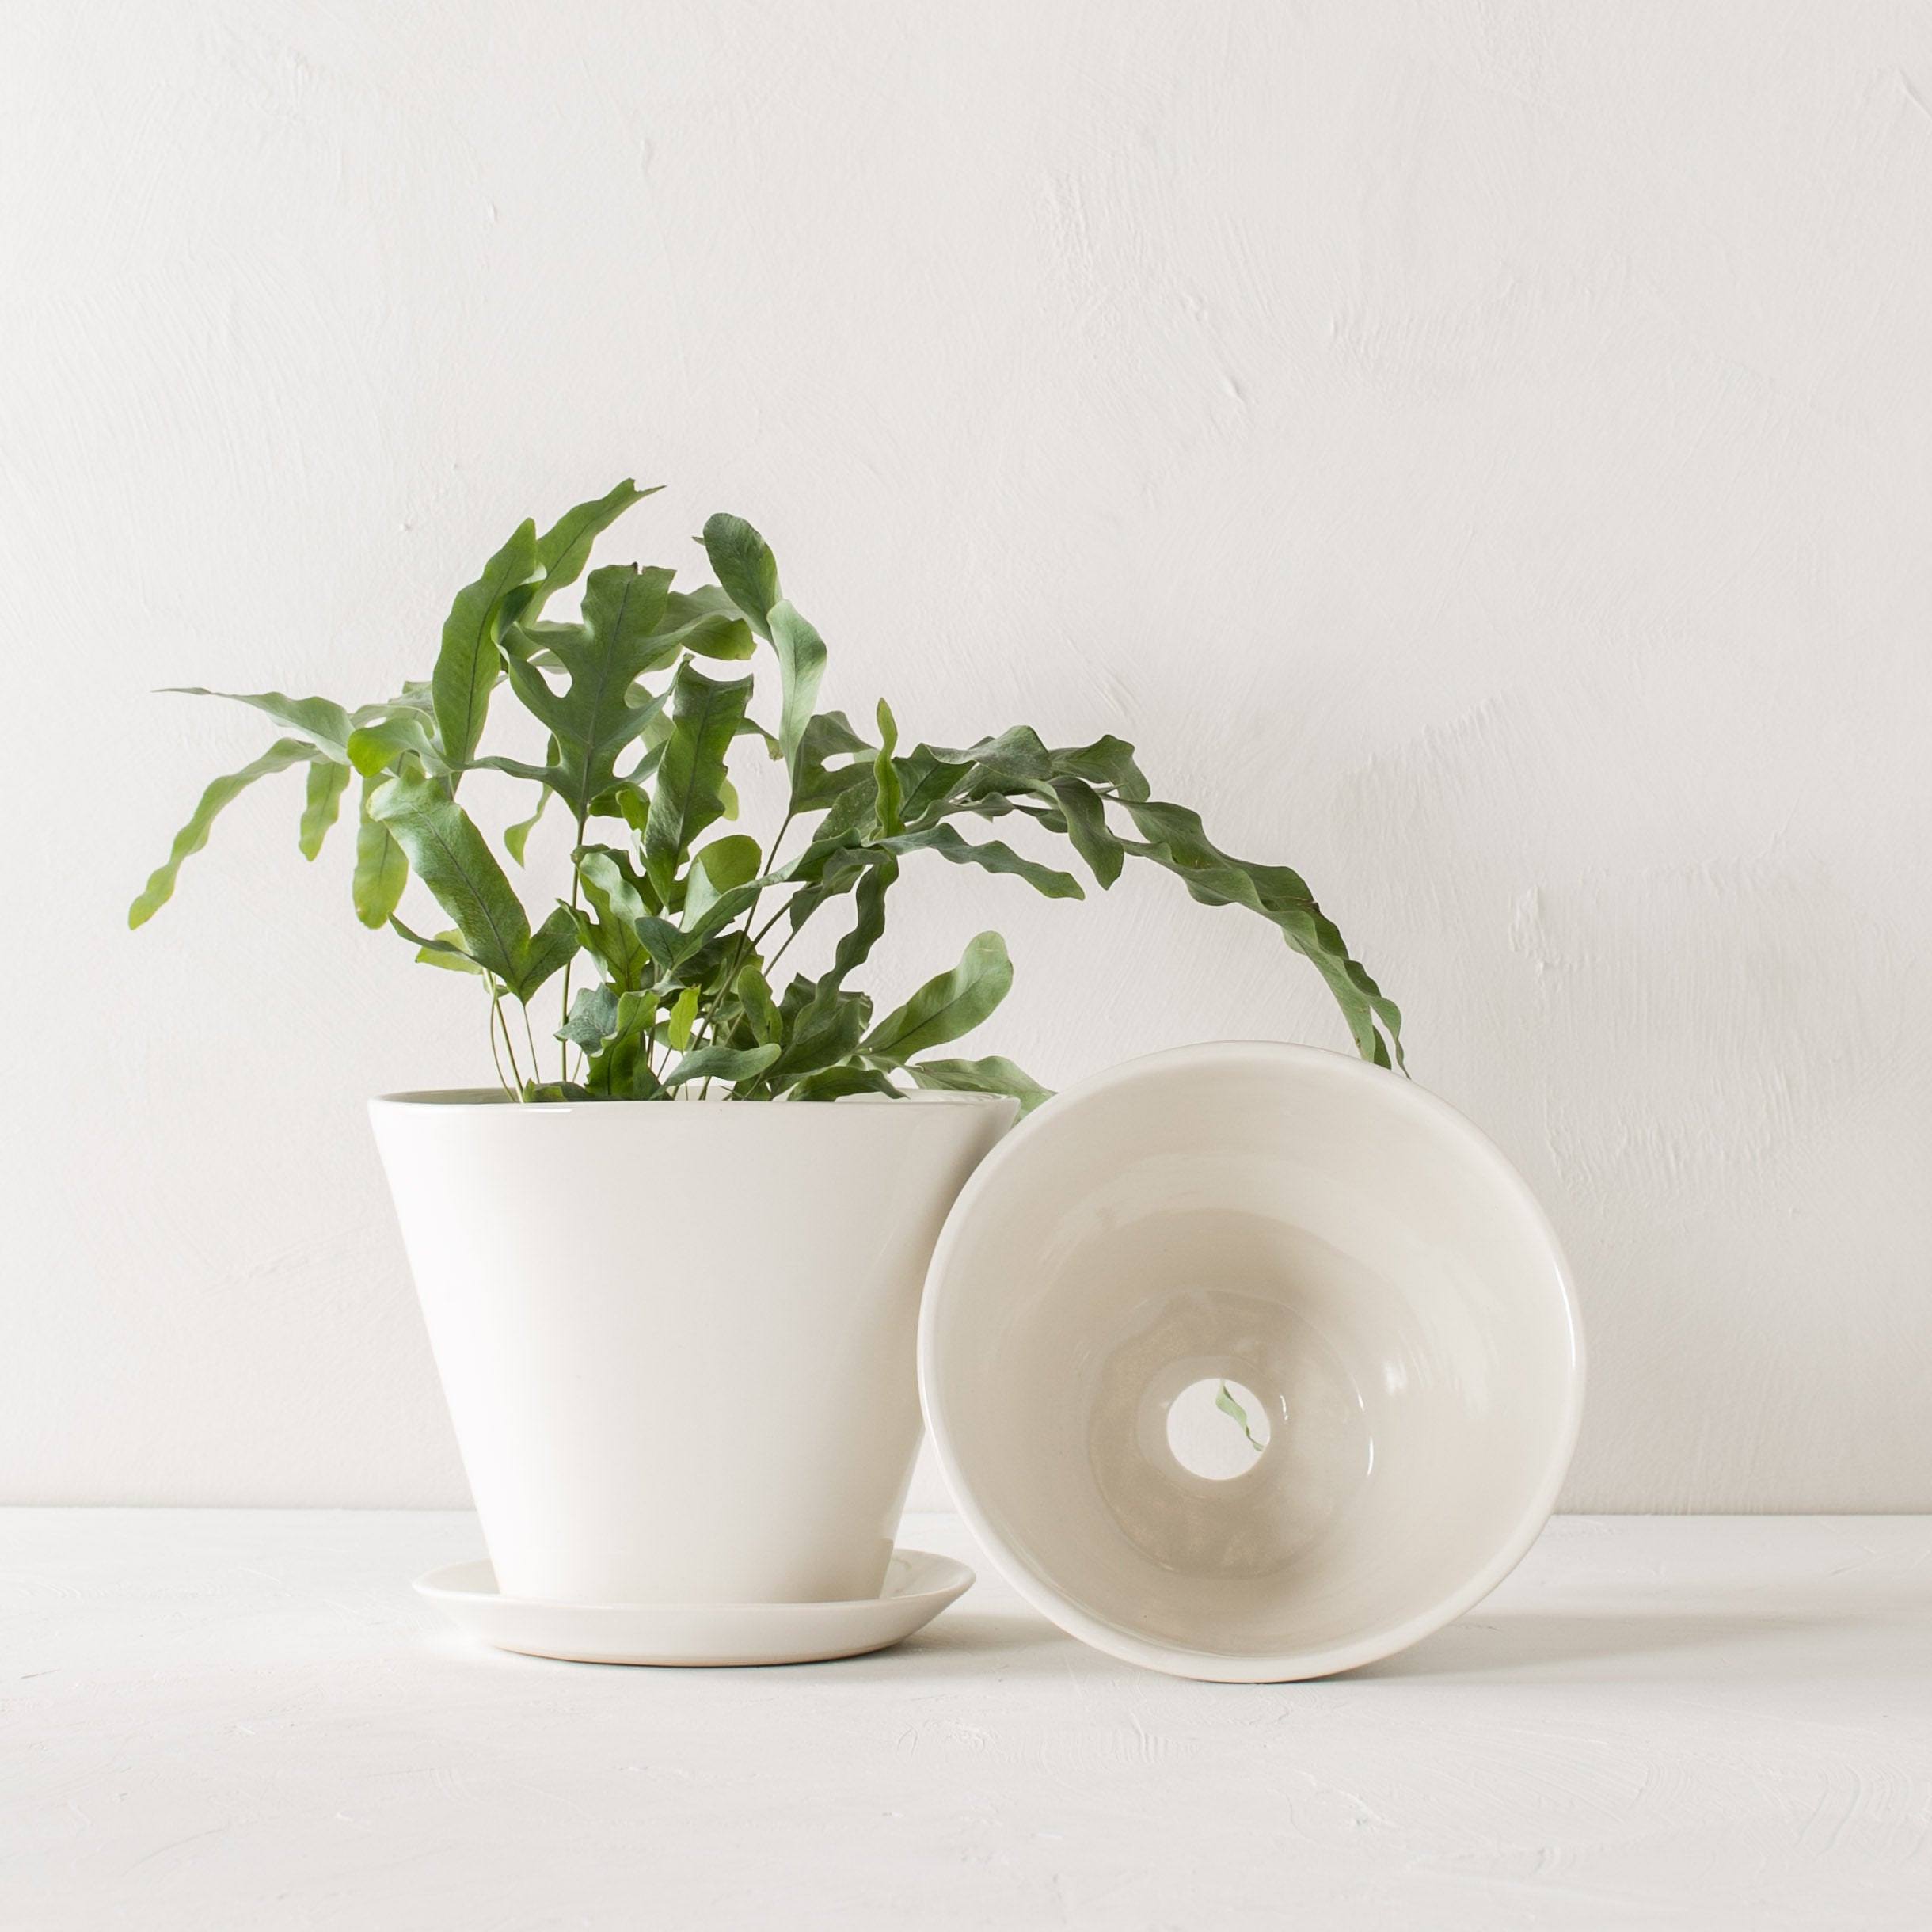 Two minimal white 7 inch tapered planters. One upright with a plant inside as well as a bottom drainage dish. The second laying on its side showing off the bottom drainage hole. Designed and sold by Convivial Production, Kansas City Ceramics.